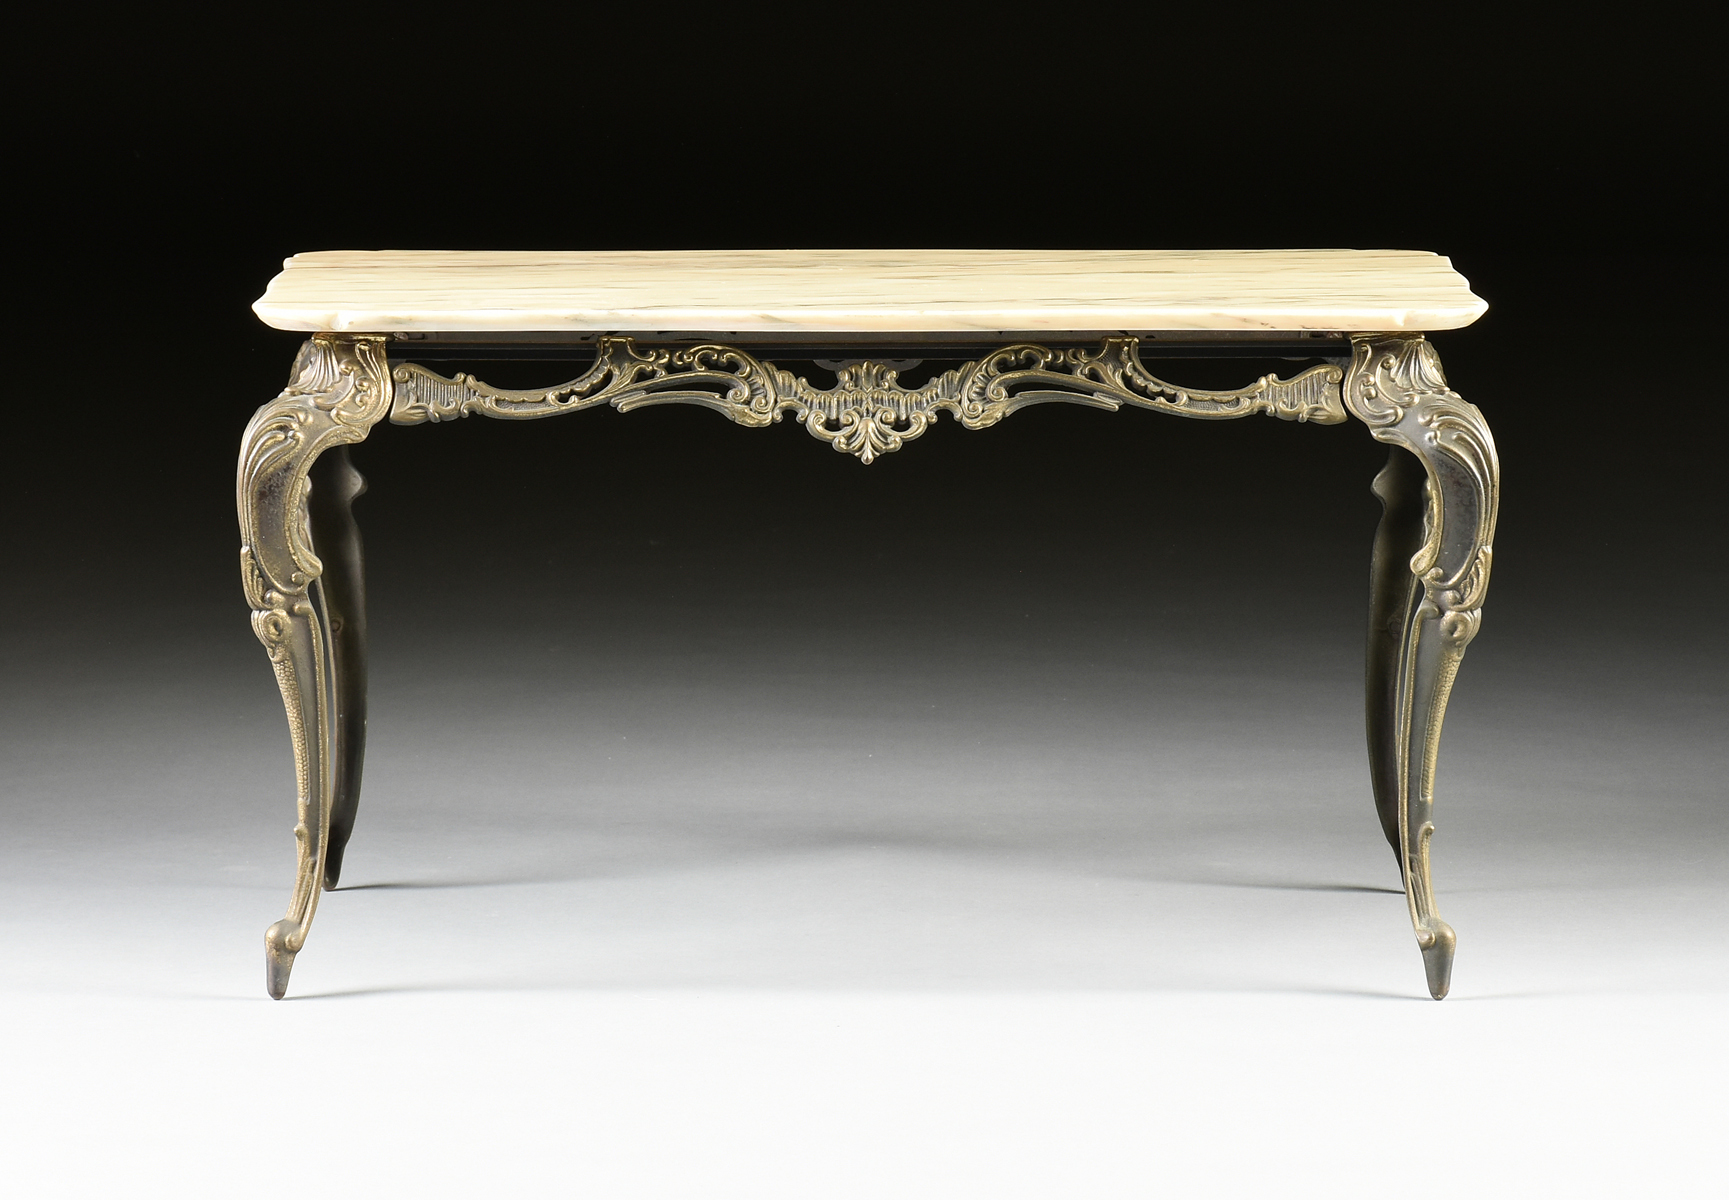 A ROCOCO REVIVAL MARBLE TOP GILT BRASS COFFEE TABLE, EARLY/MID 20TH CENTURY, the serpentine edge - Image 2 of 9